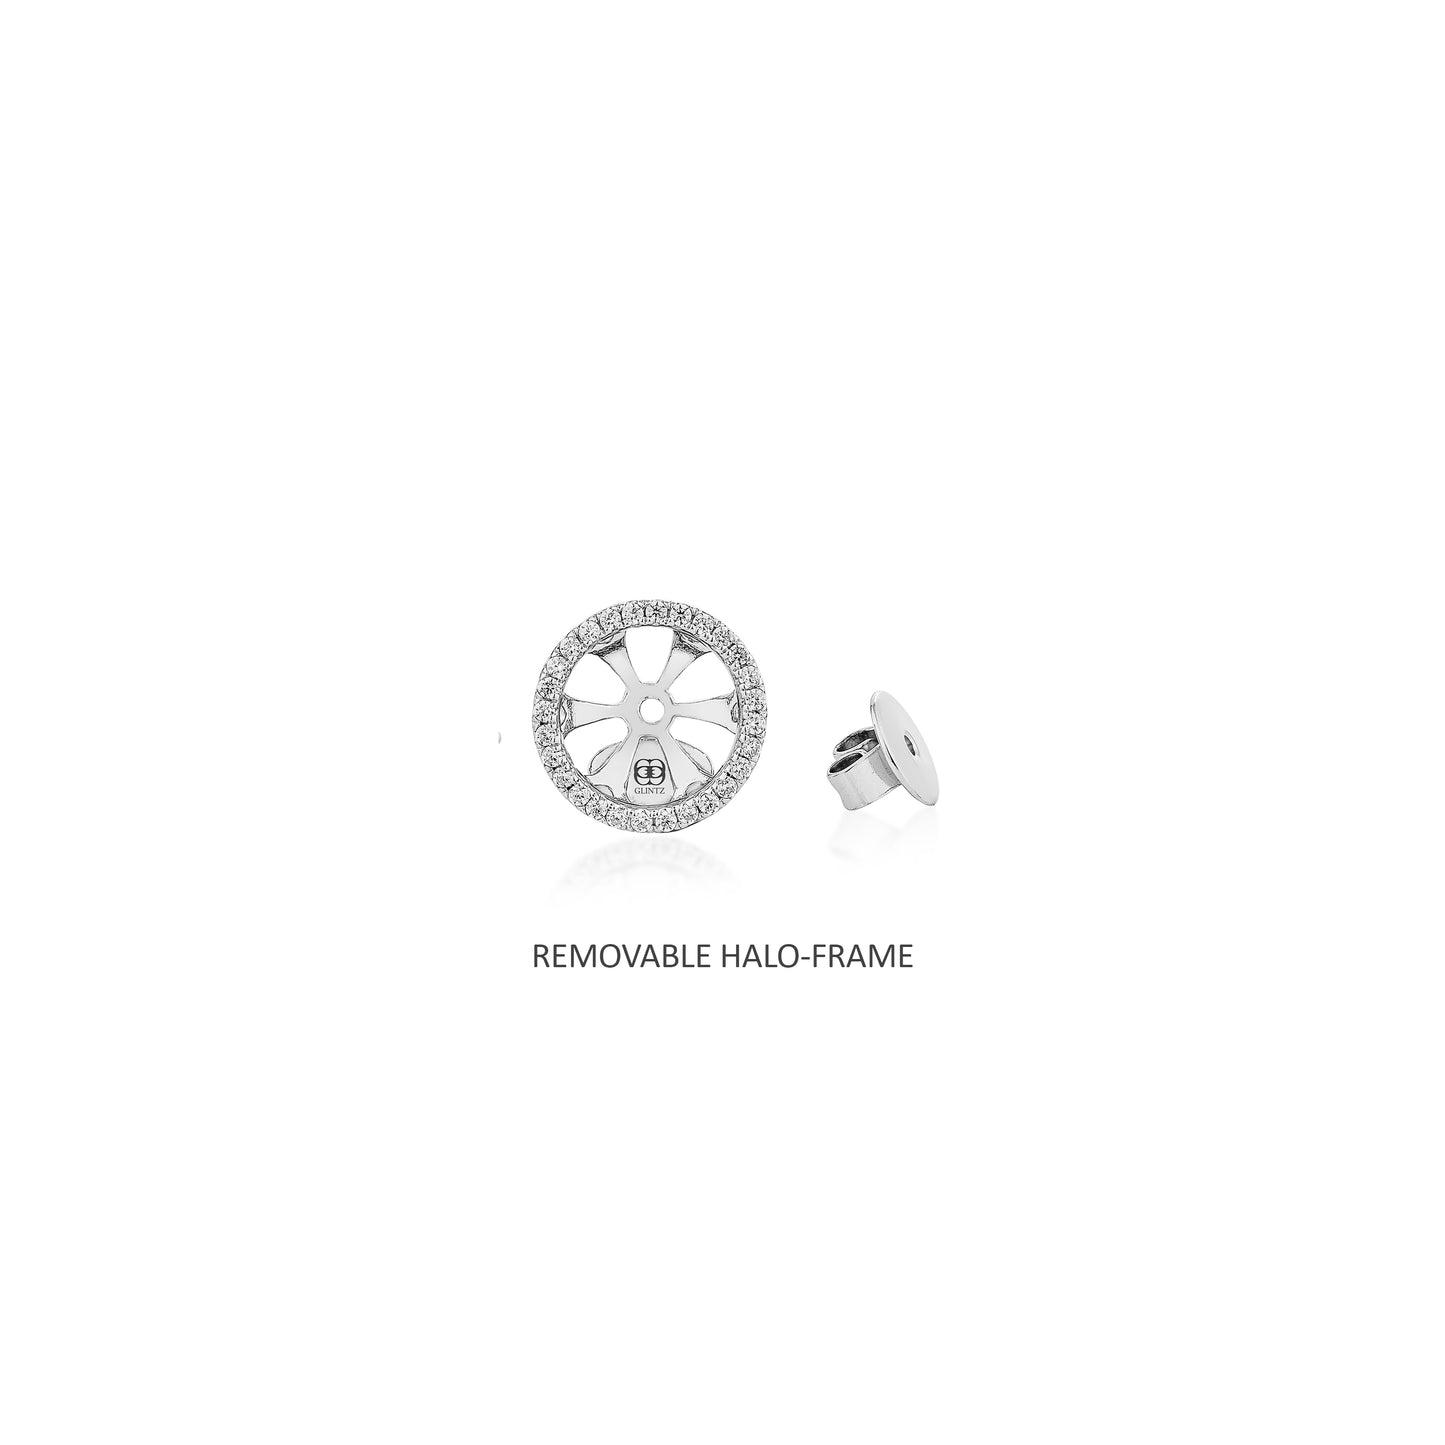 Glintz Classic Removable halo setting frame 9mm in Canary Cz.